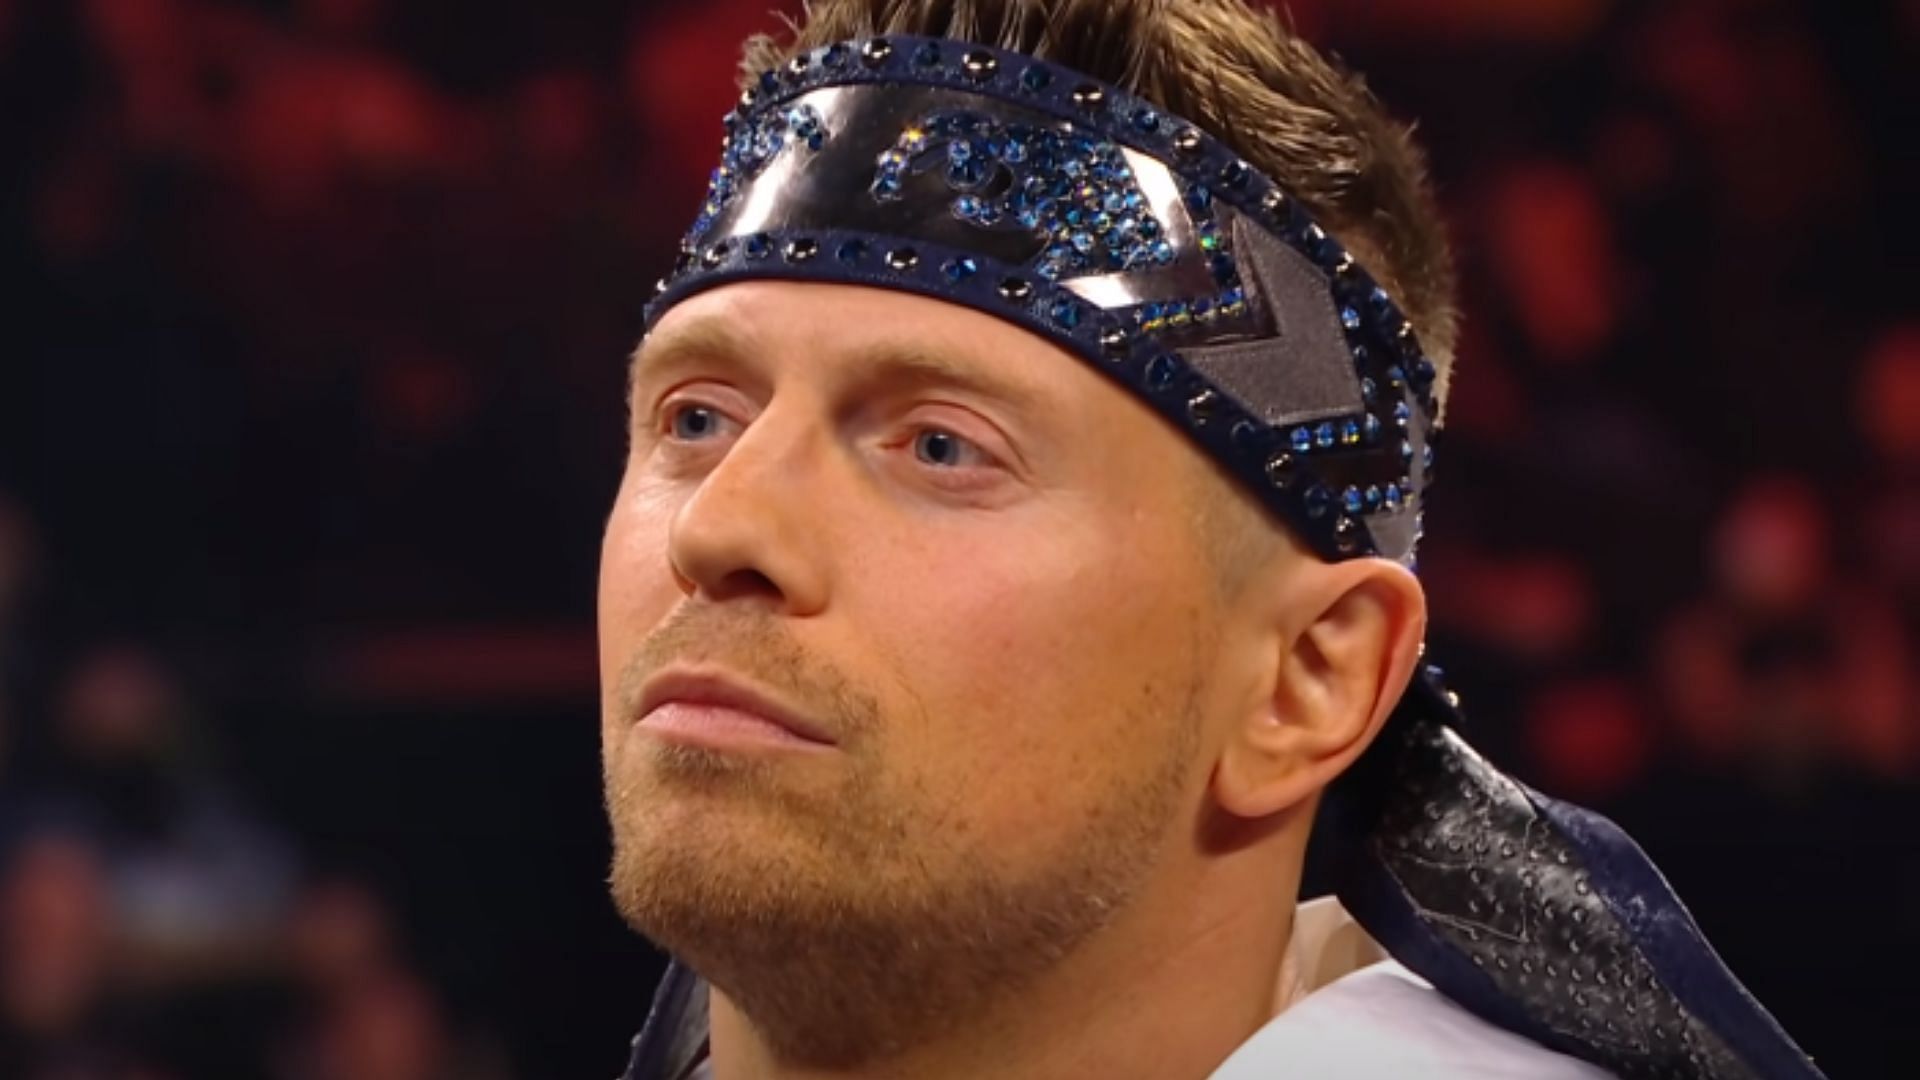 The Miz does not want Hannibal to wrestle again.